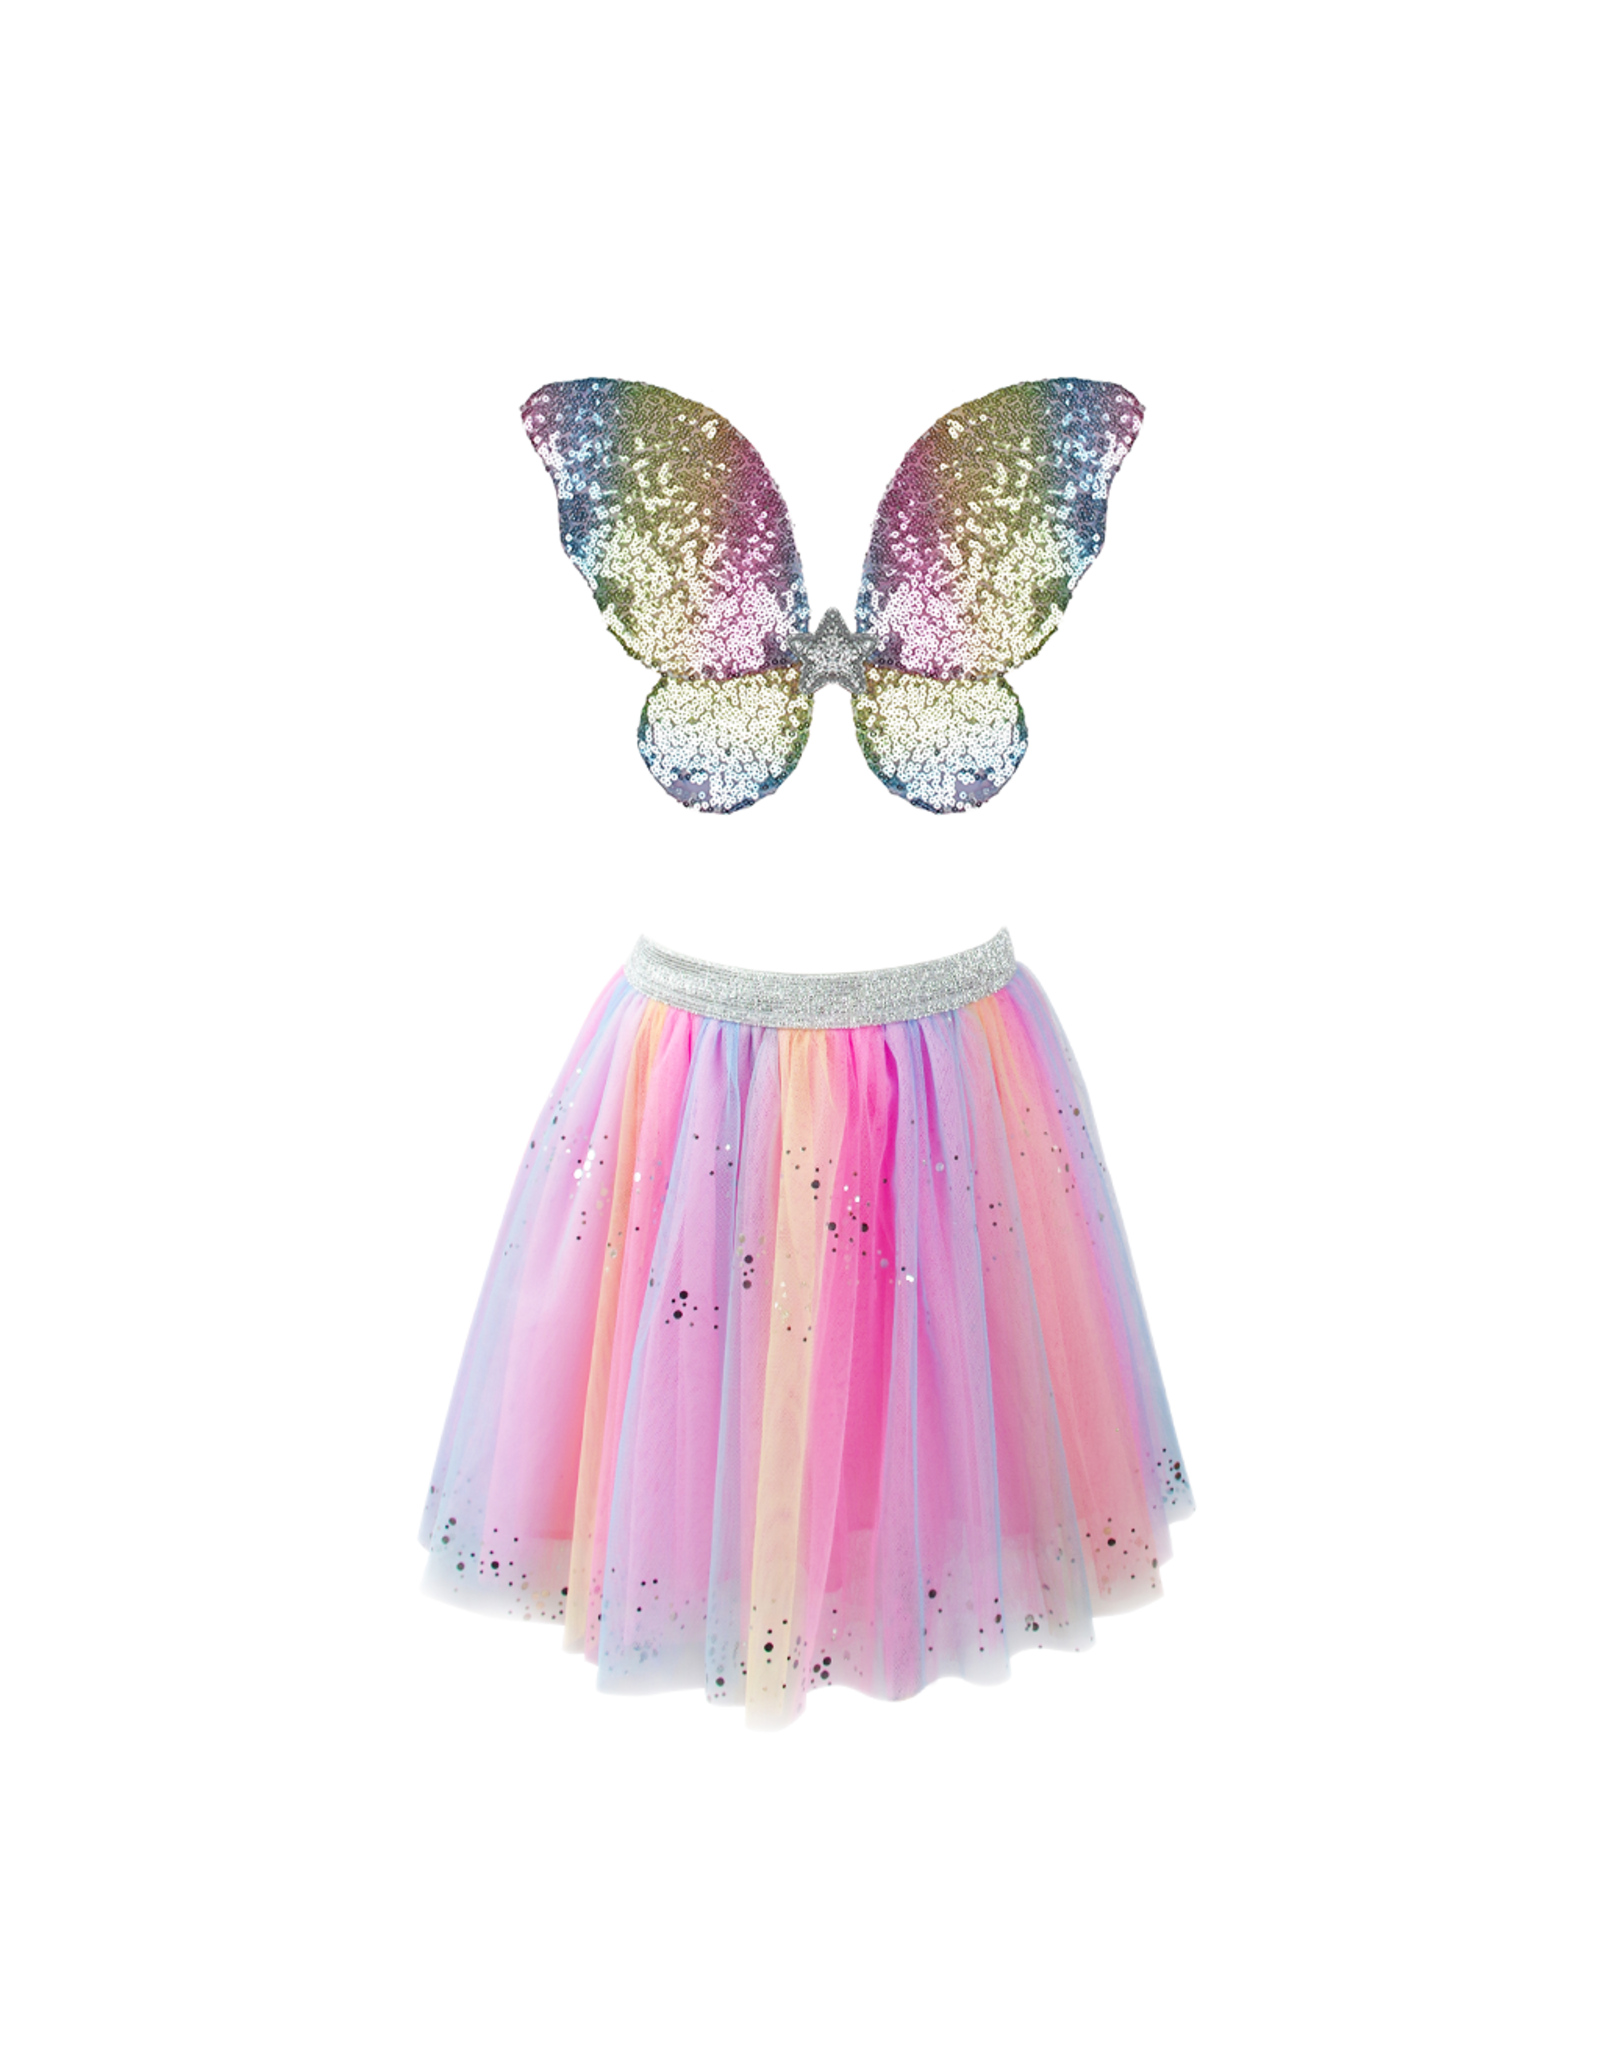 Great Pretenders Rainbow Sequins Skirt, Wings & Wand, Size 4/6